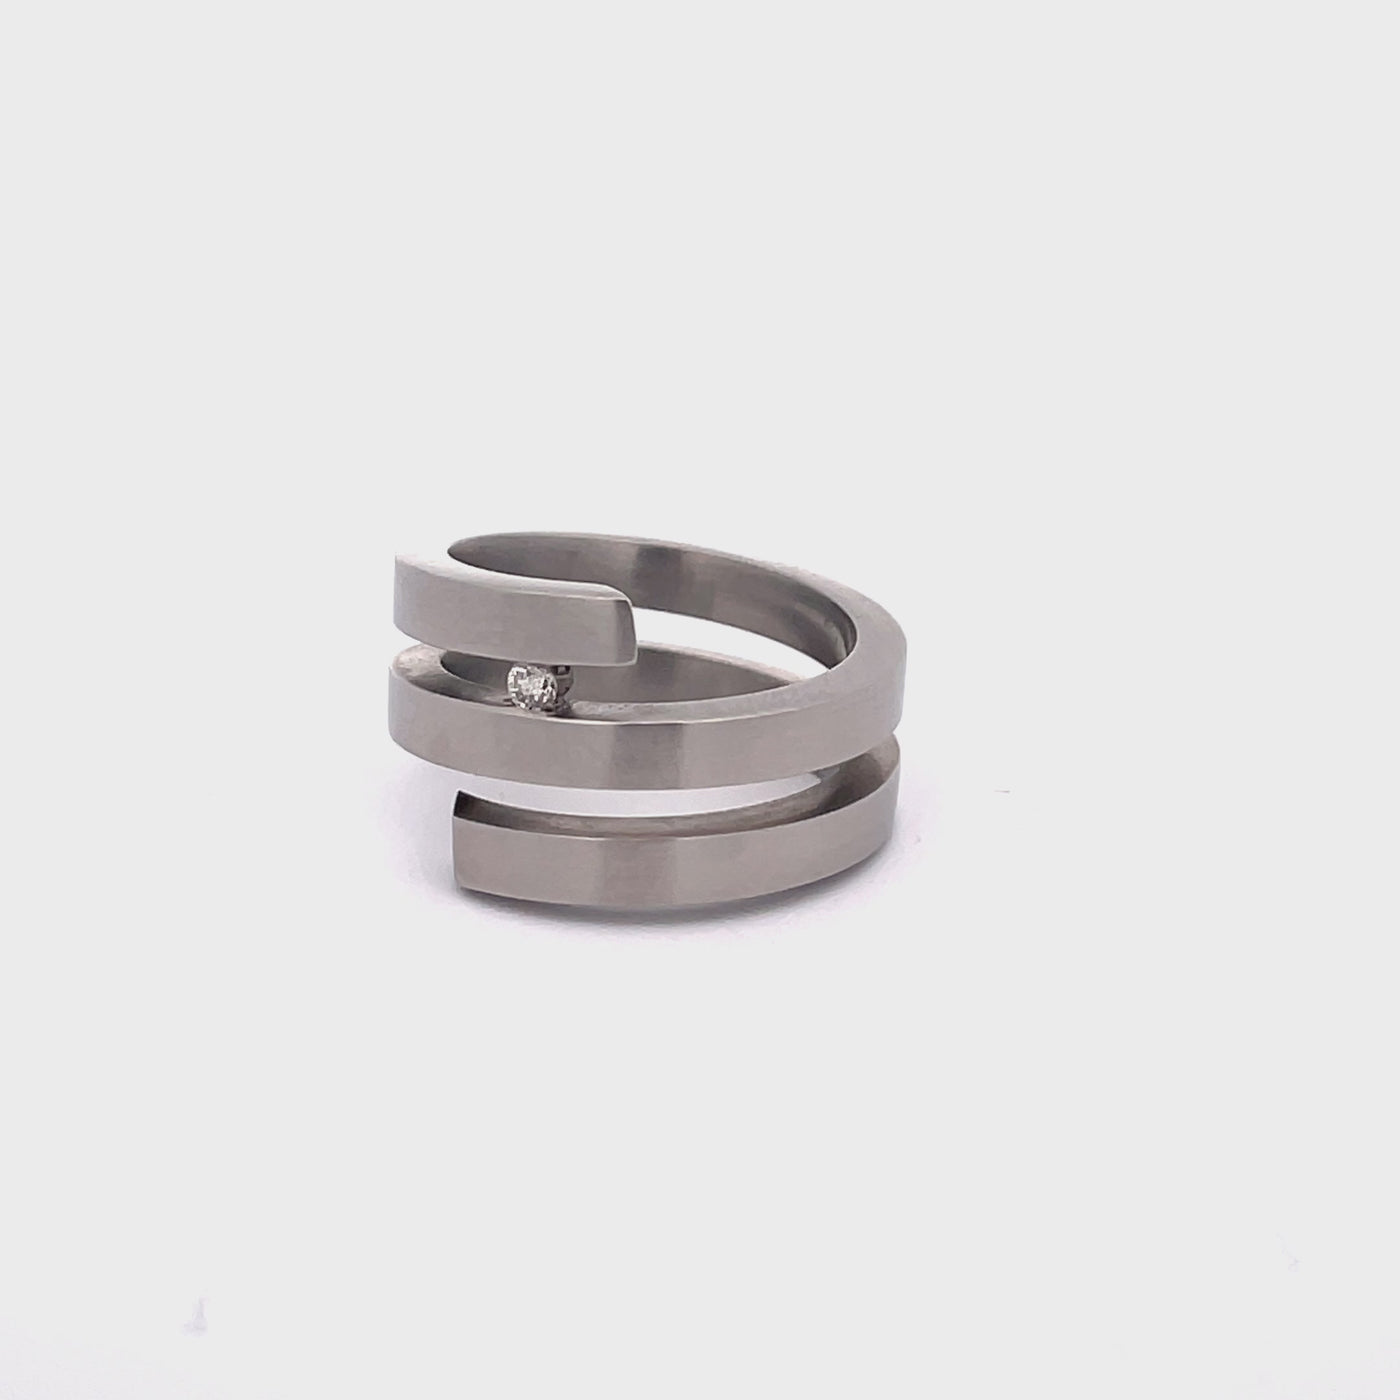 Brushed Stainless Steel Coil Diamond Ring Size N